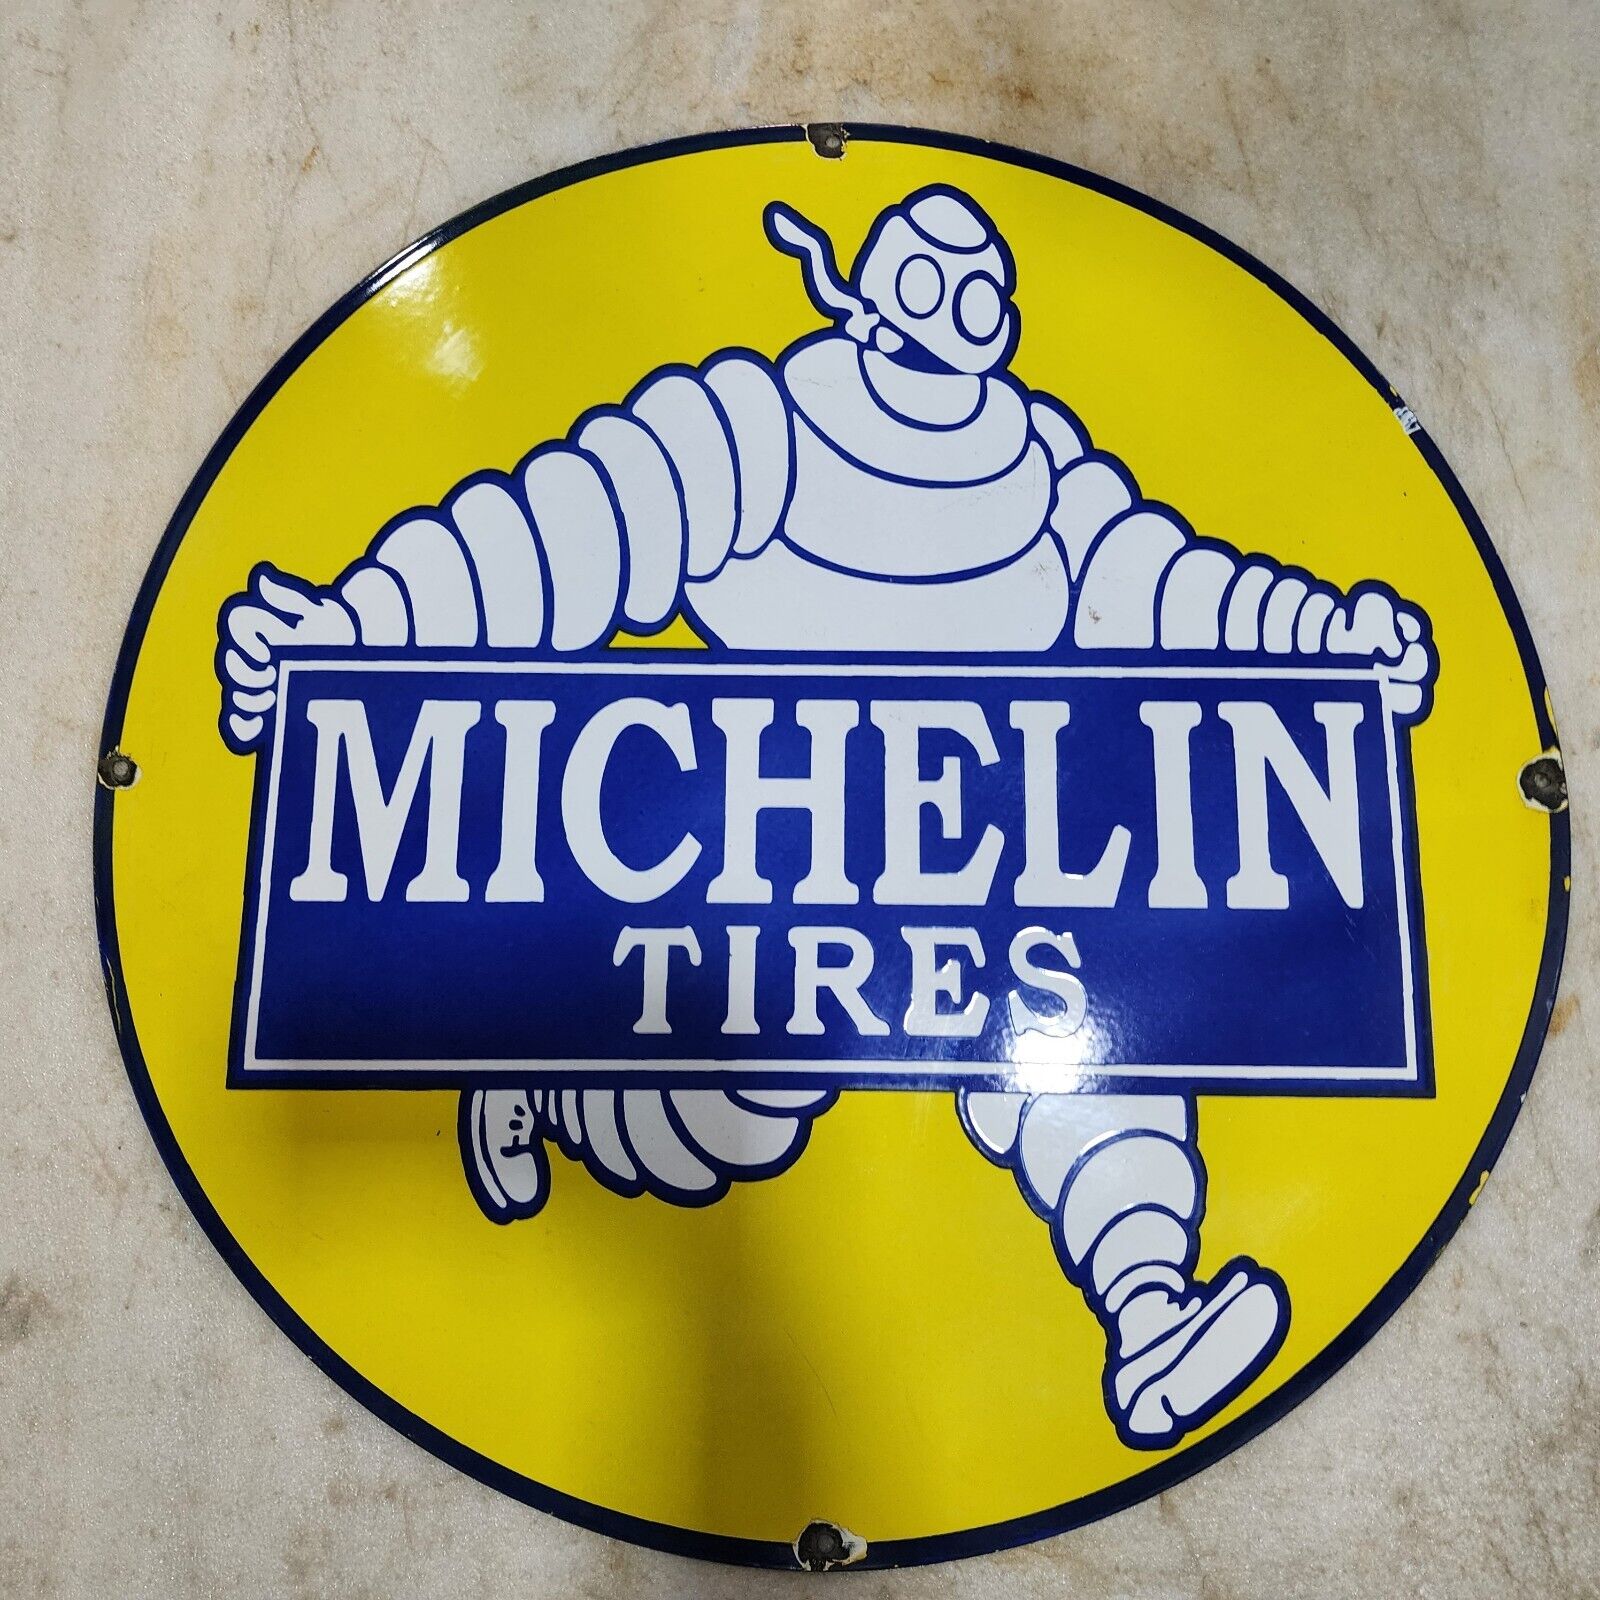 MICHELIN TIRES 30 INCHES ROUND ENAMEL SIGN